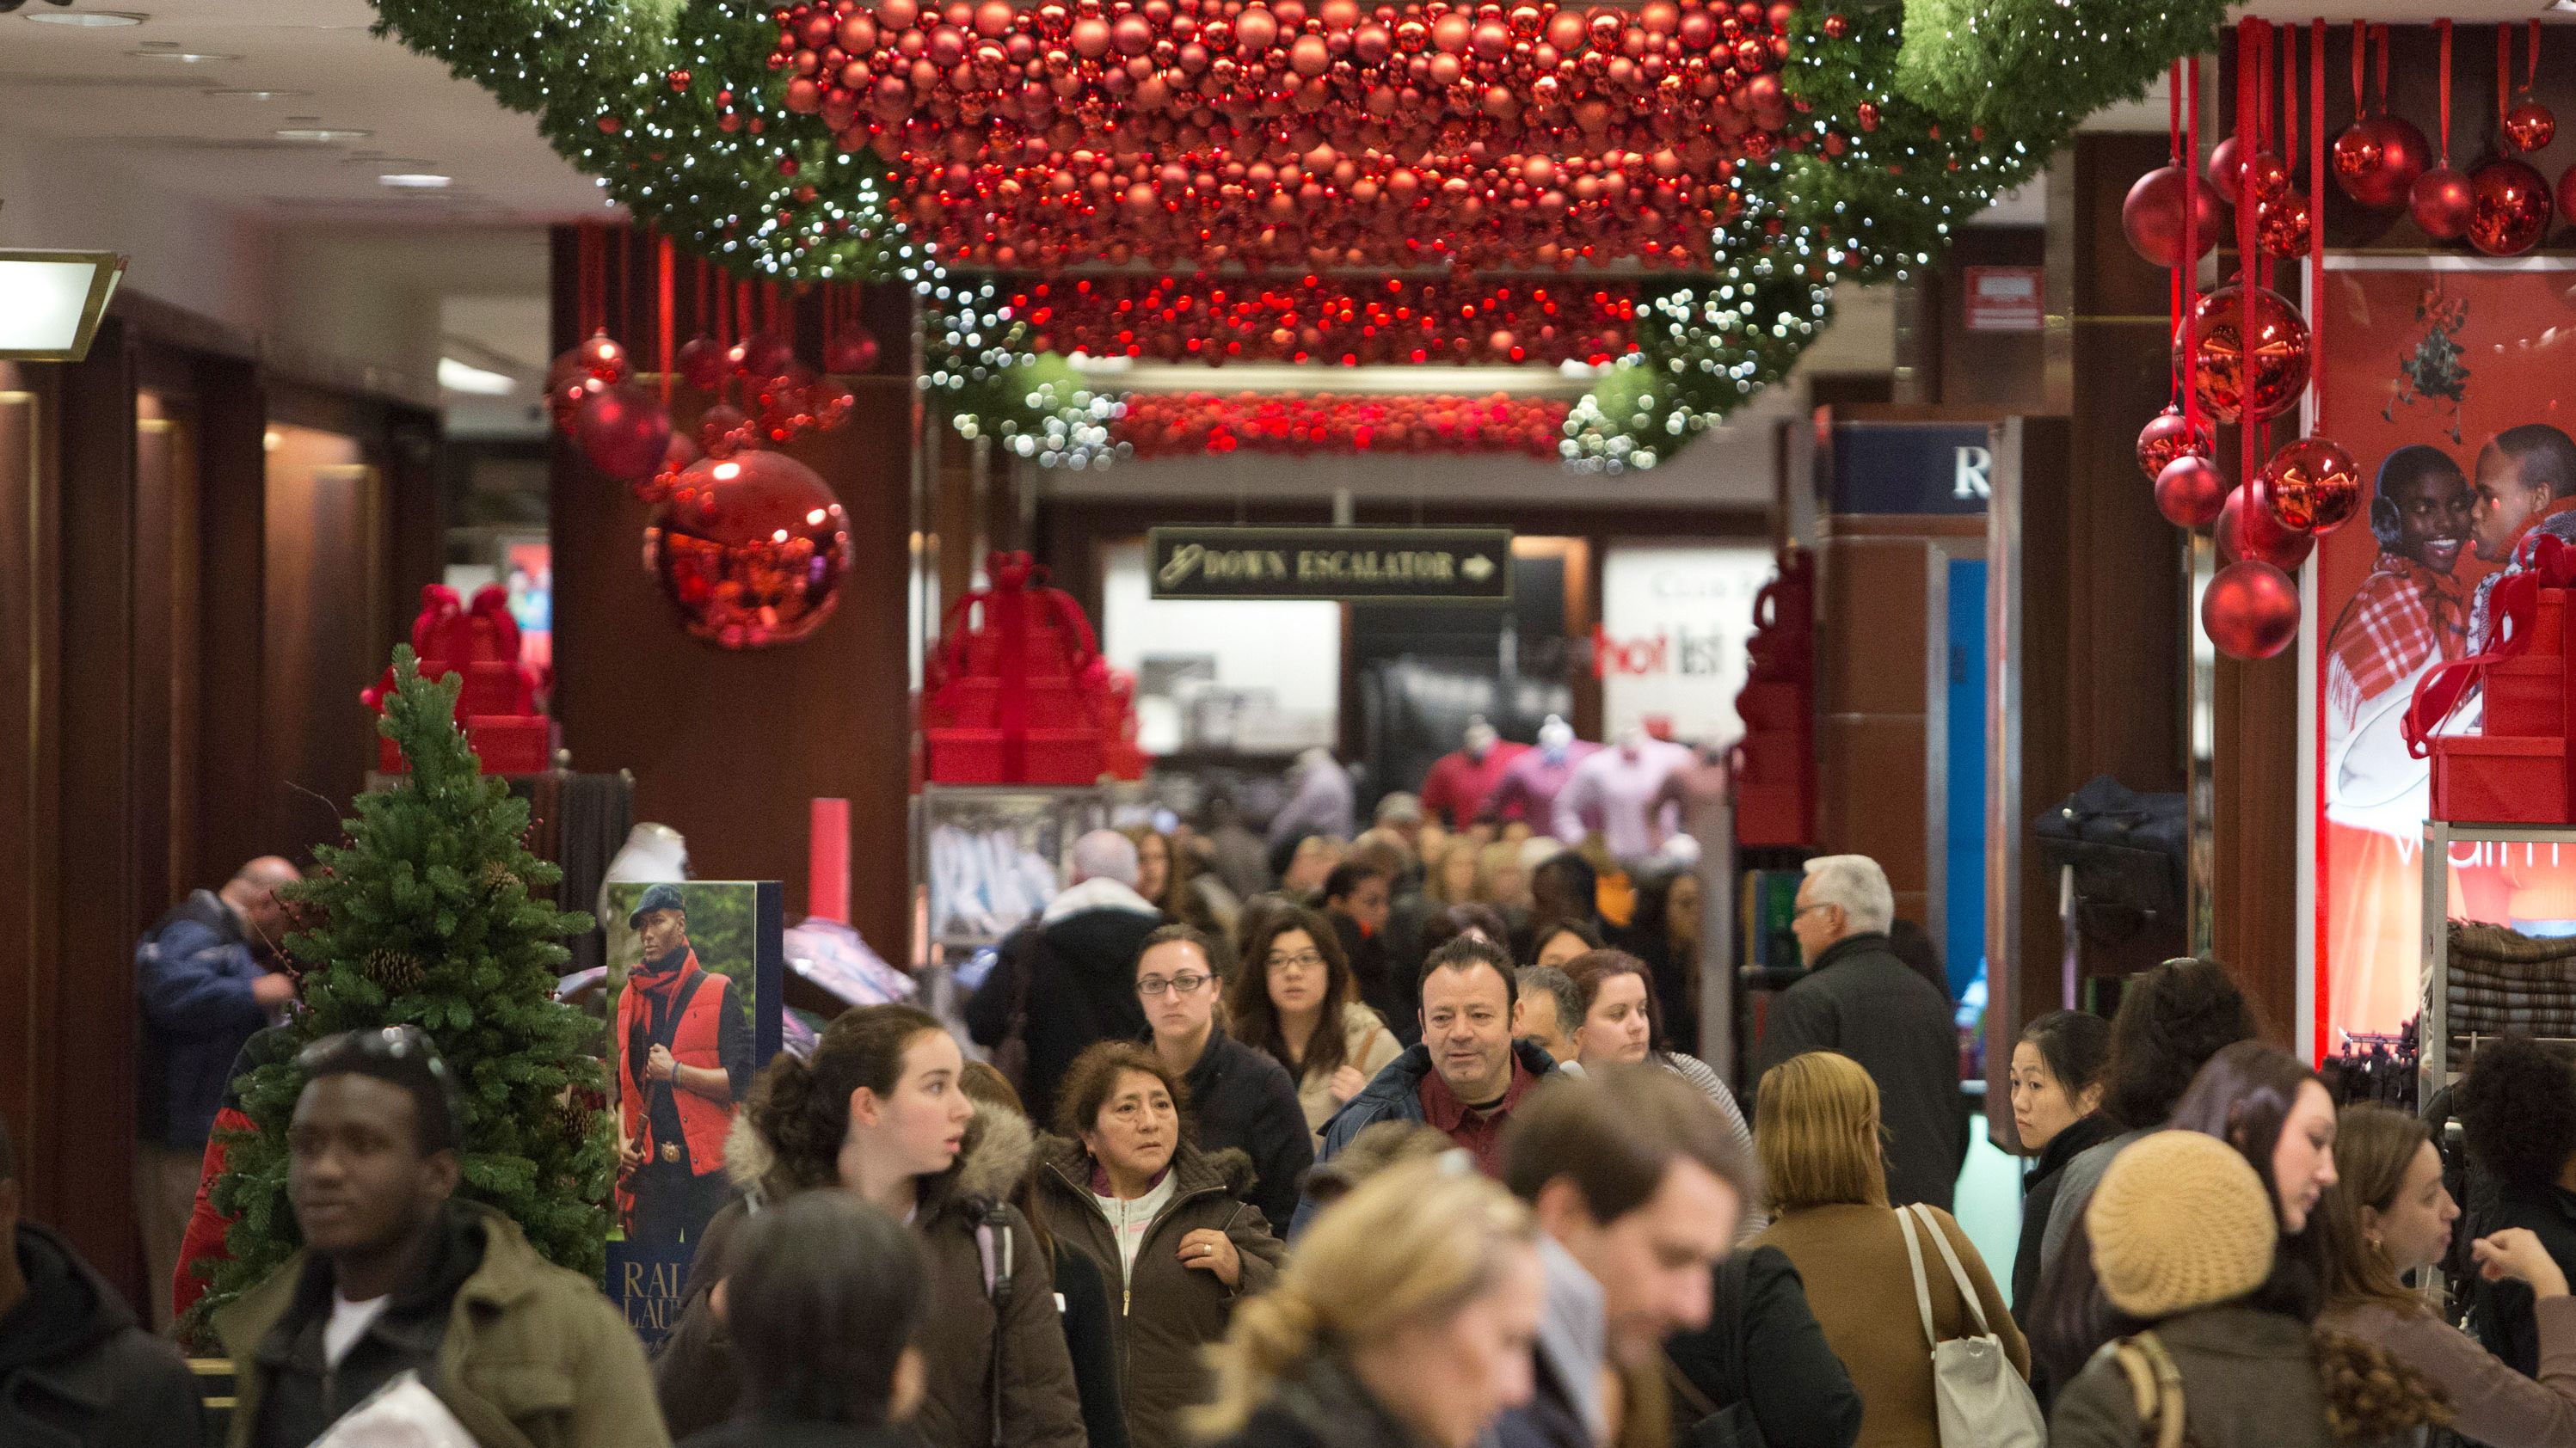 Scrooge and a Digital Christmas | HuffPost - What Kind Of Deals Does Ghd Have For Black Friday